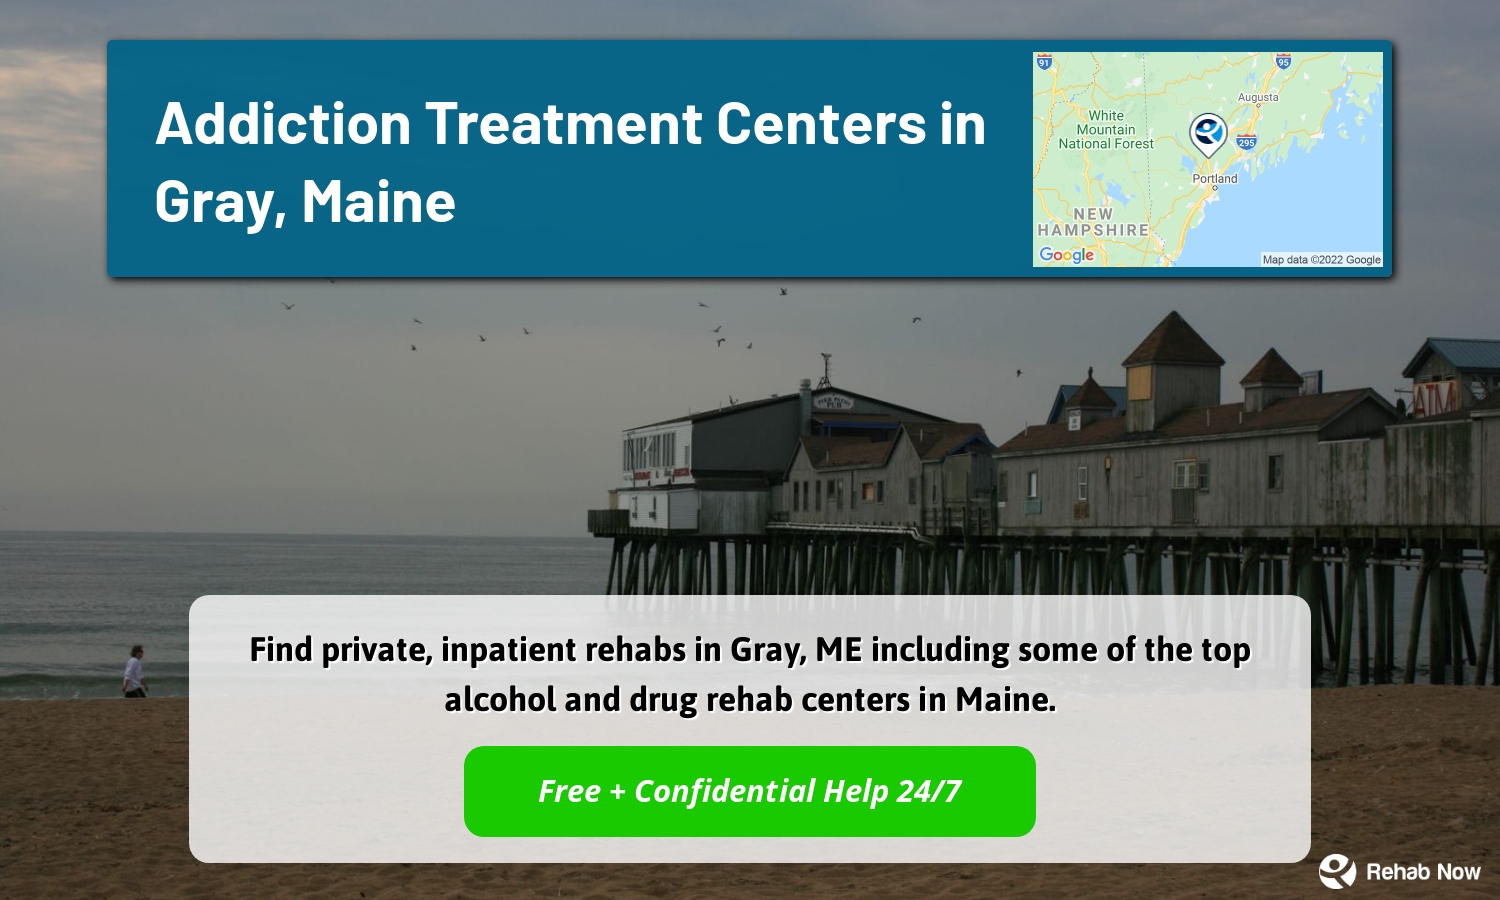 Find private, inpatient rehabs in Gray, ME including some of the top alcohol and drug rehab centers in Maine.